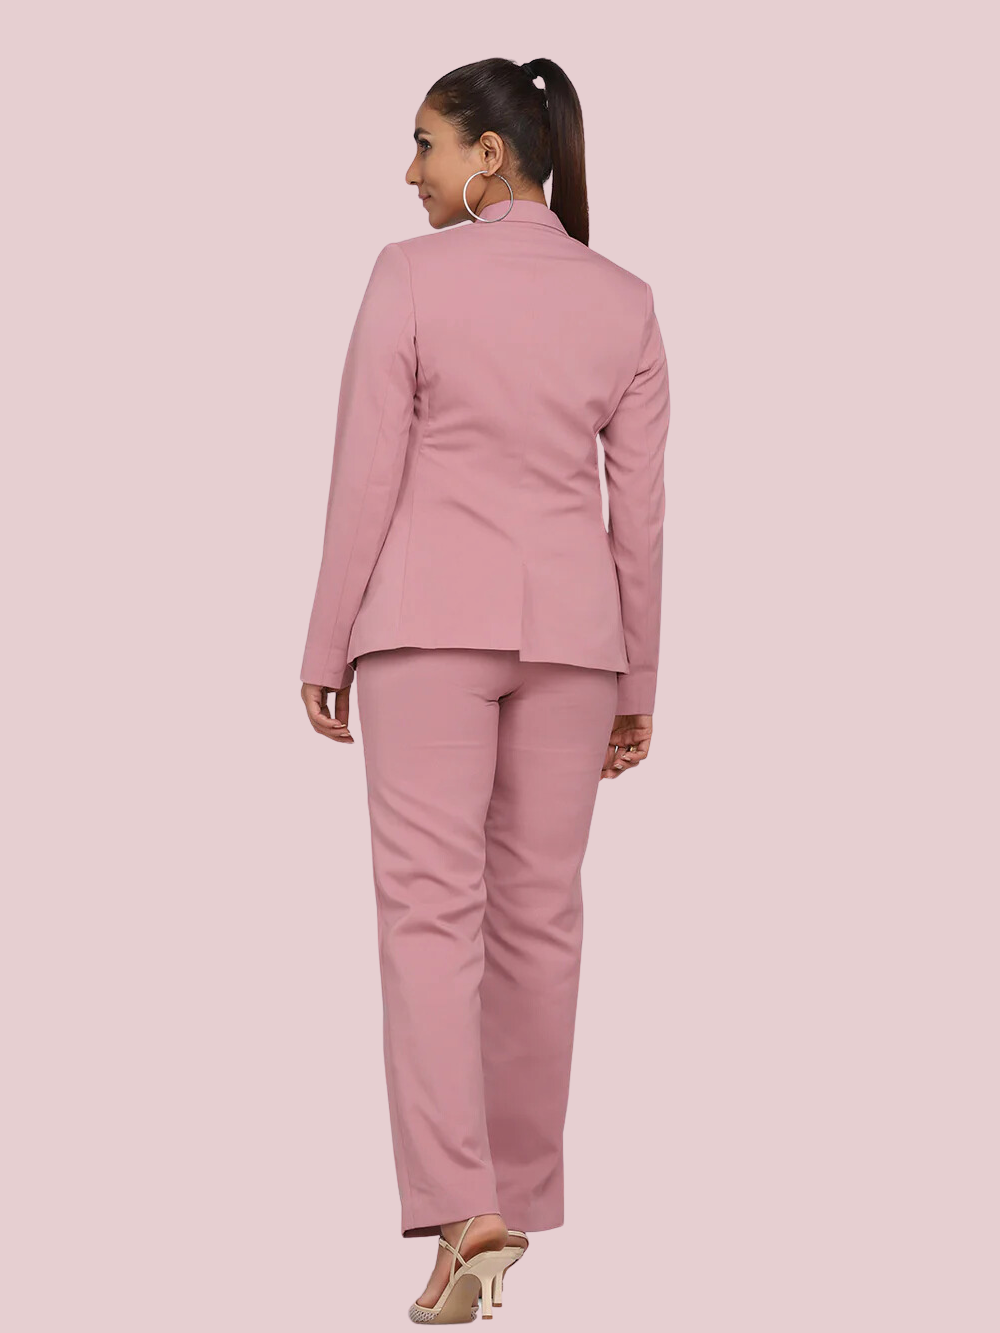 Women's Formal Poly Crepe Pant Suit - Pink | Women's Pant Suit | Power Sutra Clothing